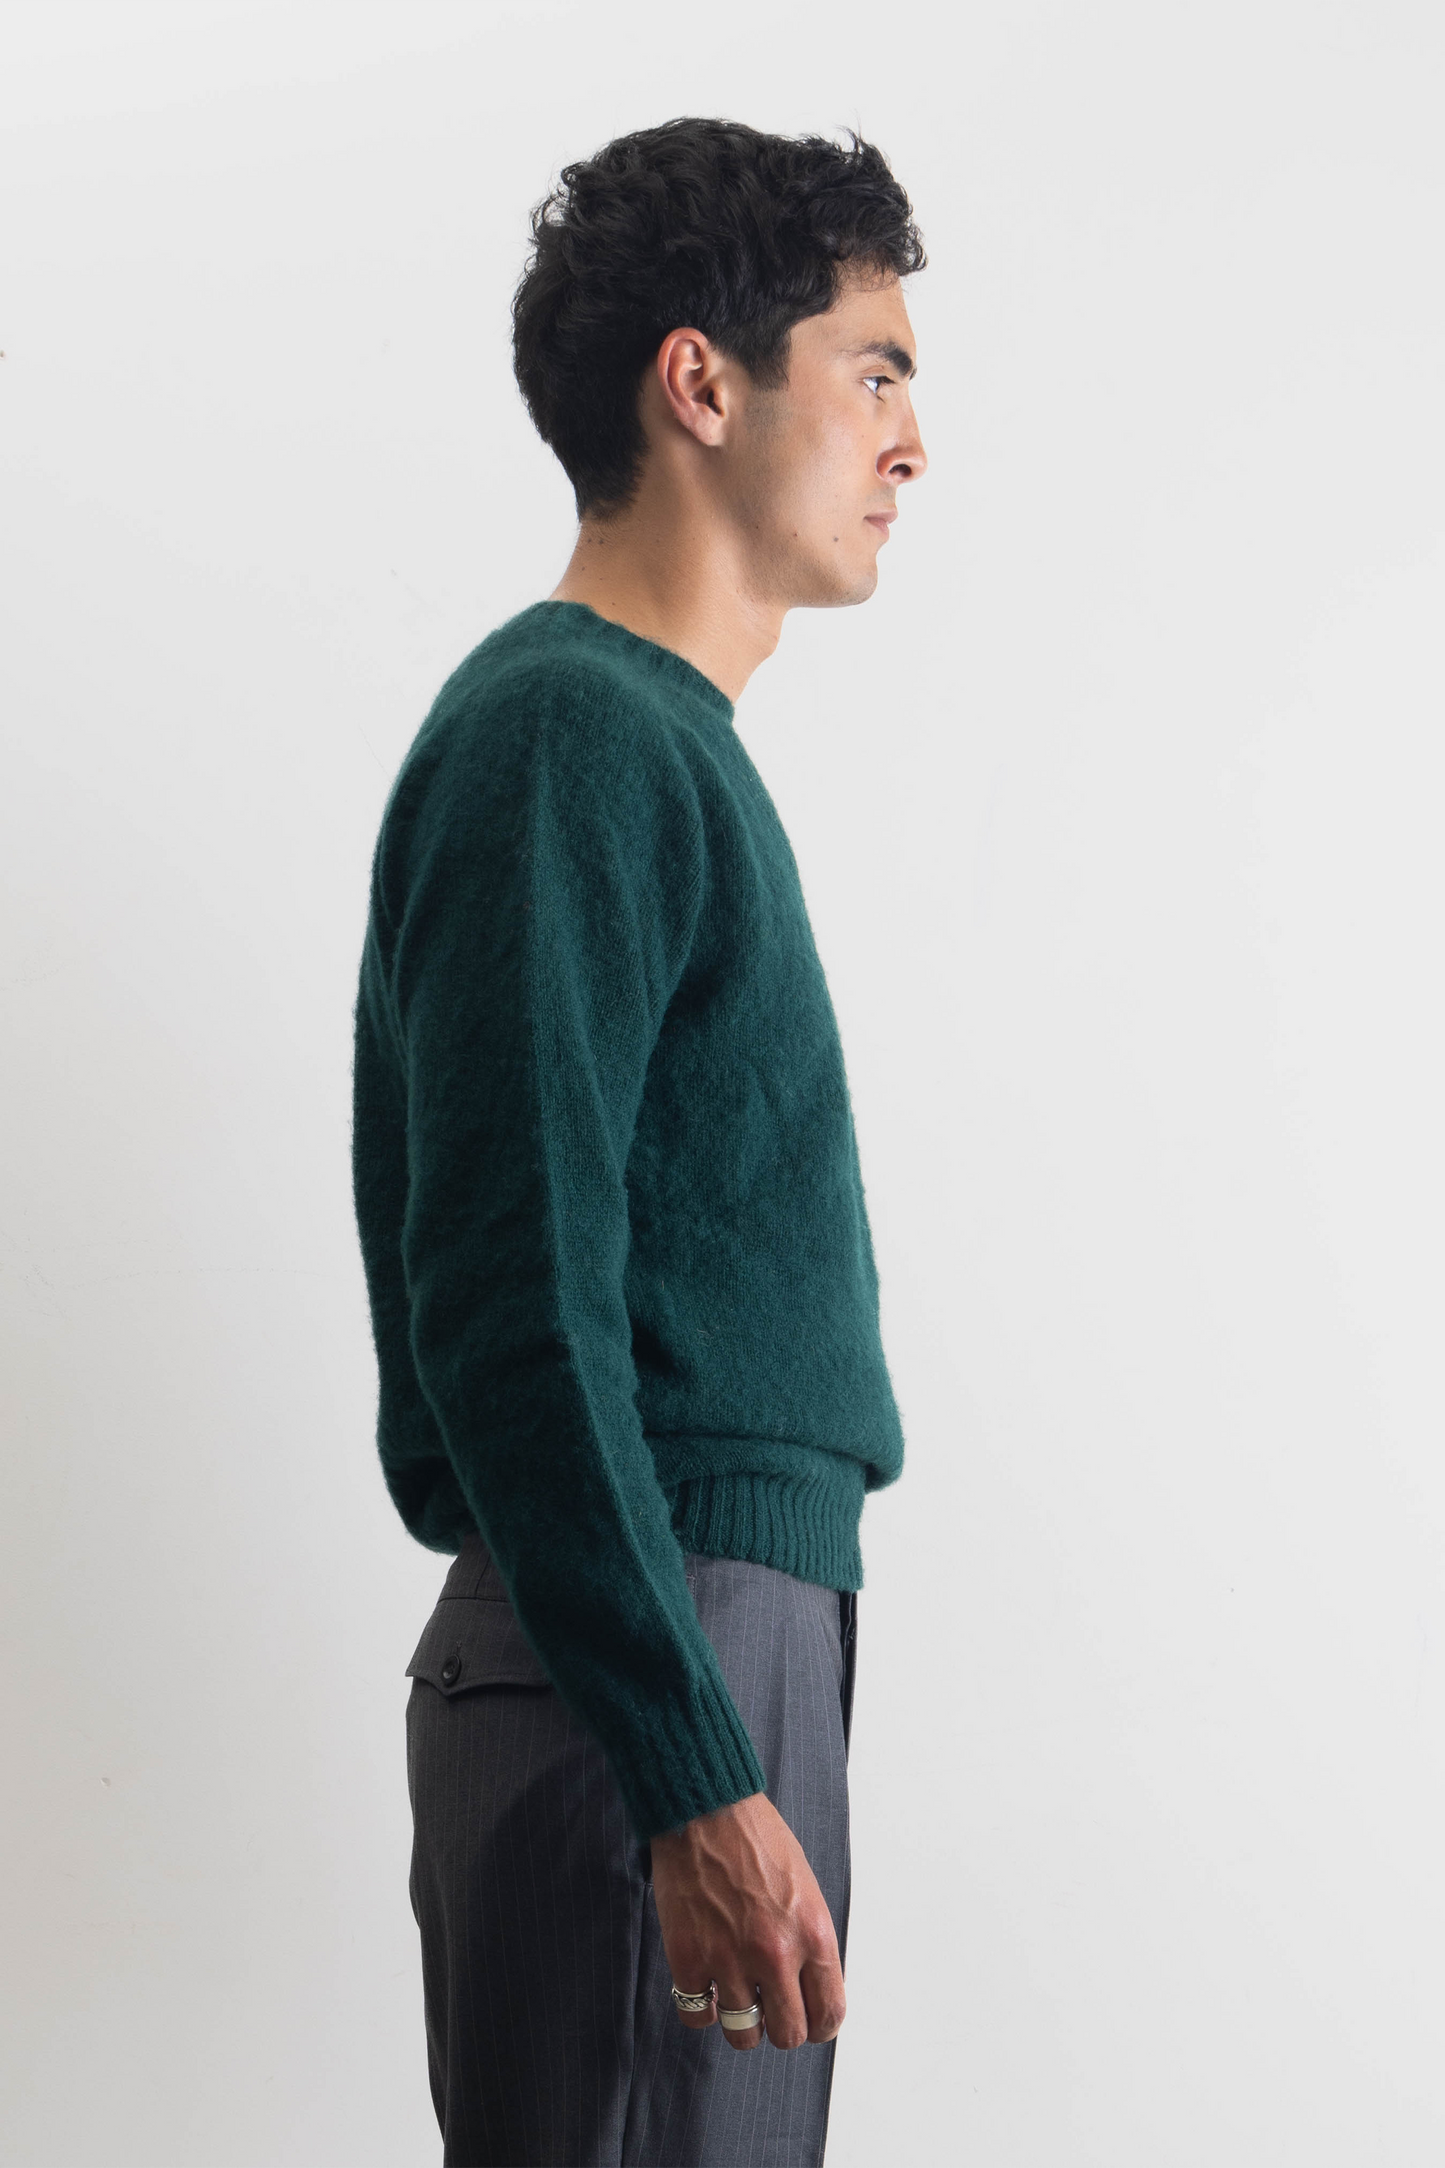 Shaggy Dog sweater in forest green wool